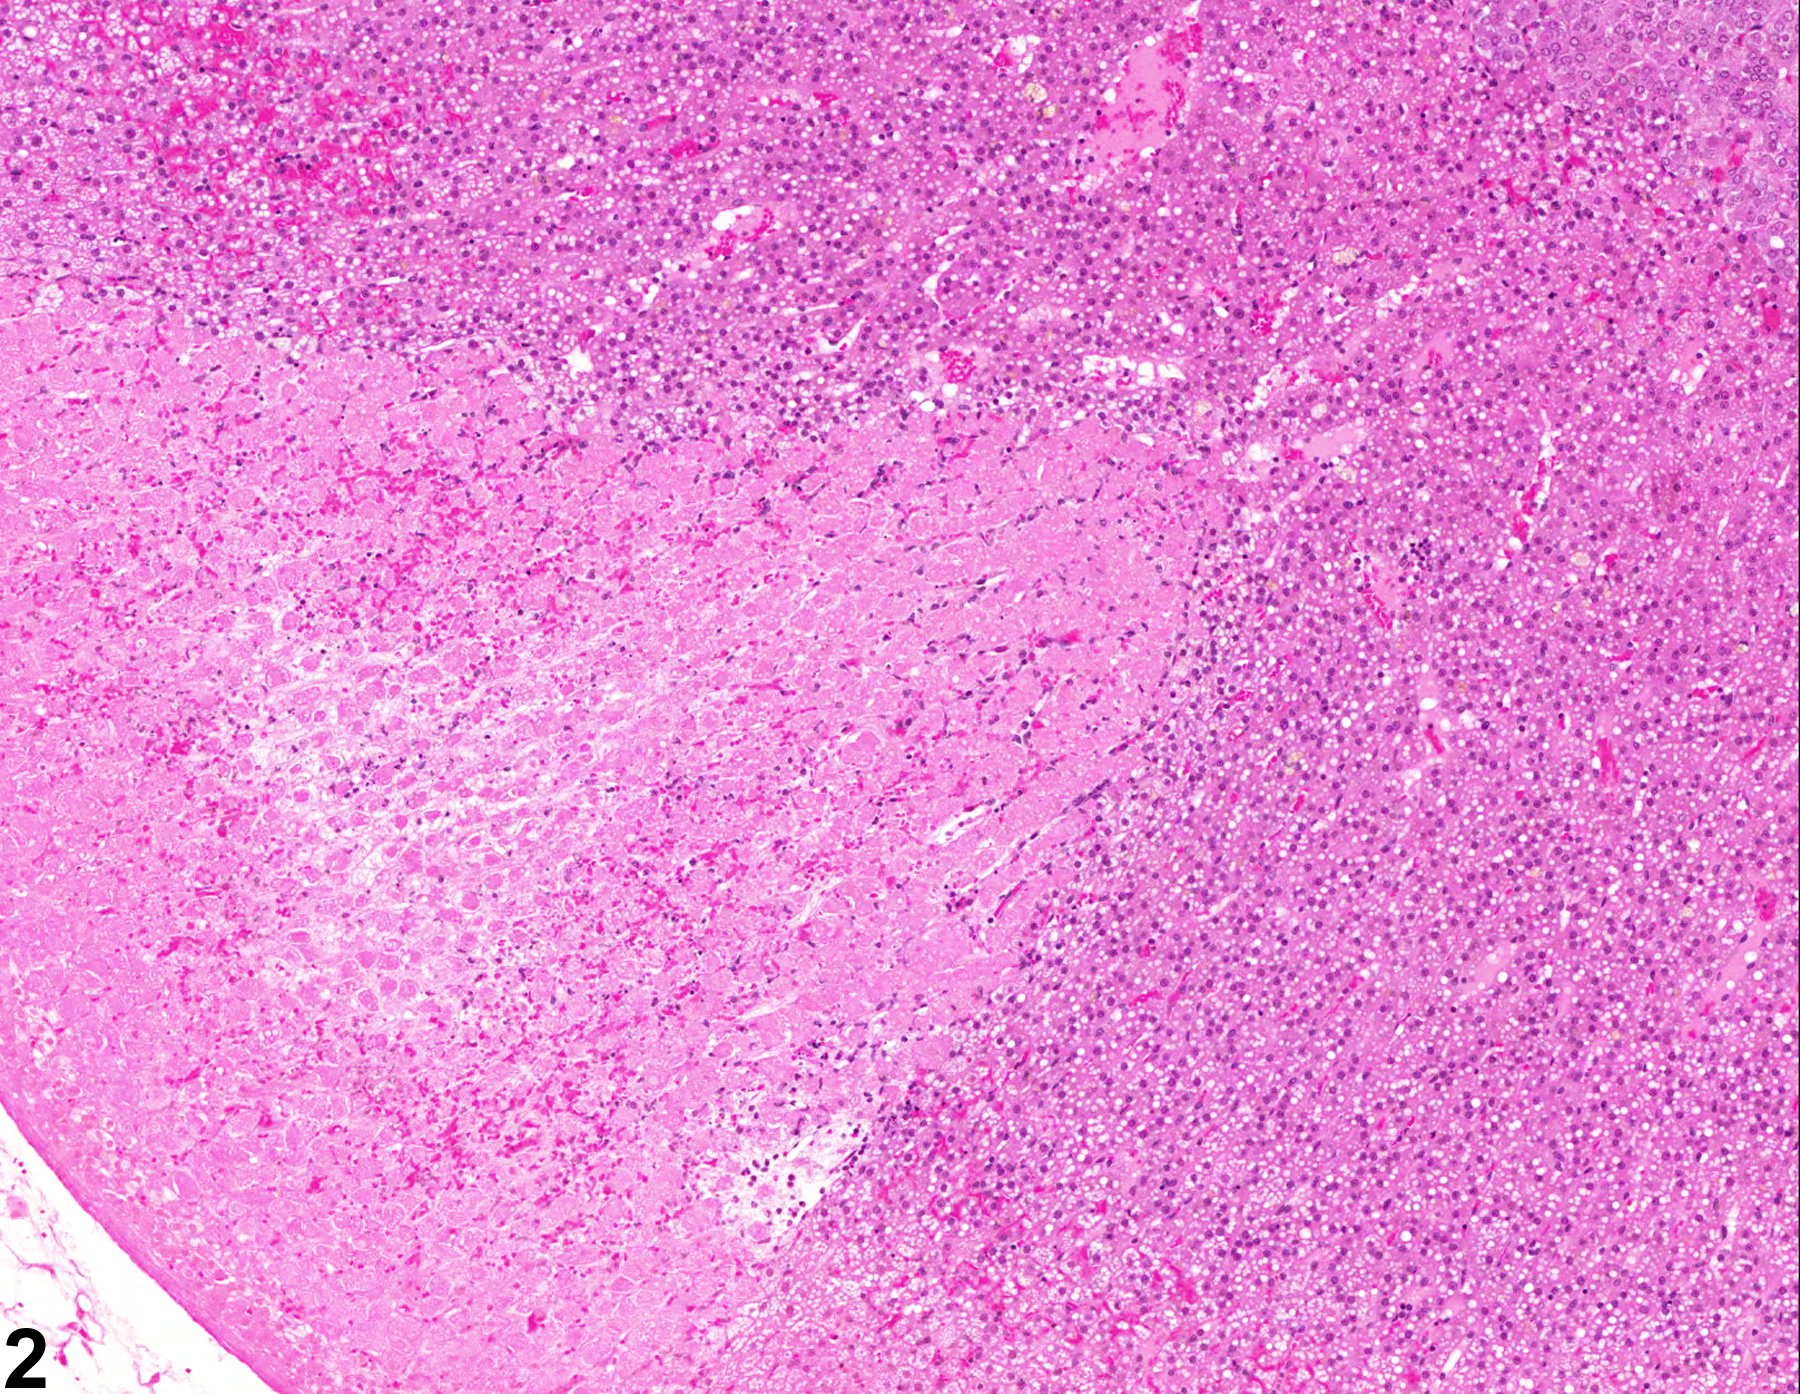 Image of infarct in the adrenal gland cortex from a female F344/N rat in a chronic study